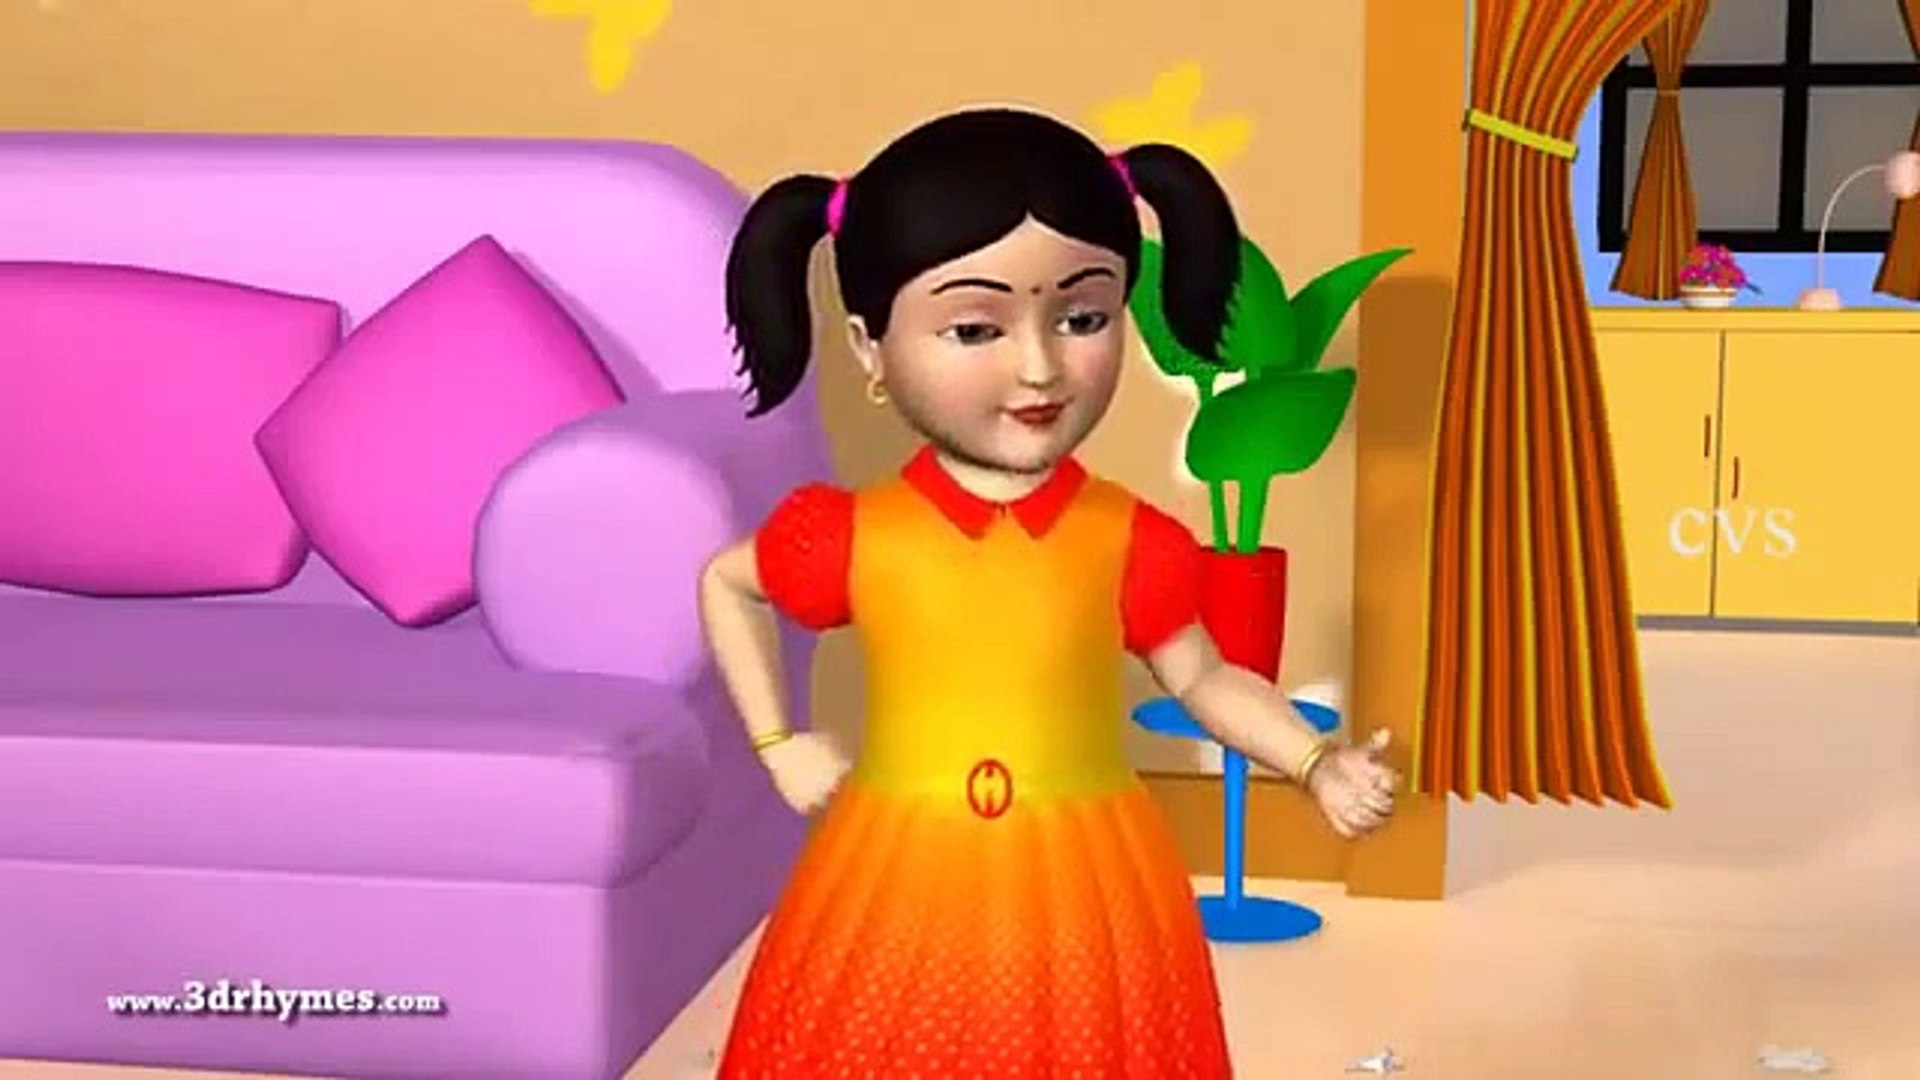 Bits of Paper 3D Animation Cartoon English Nursery Rhyme songs For Children  with Lyrics - video Dailymotion